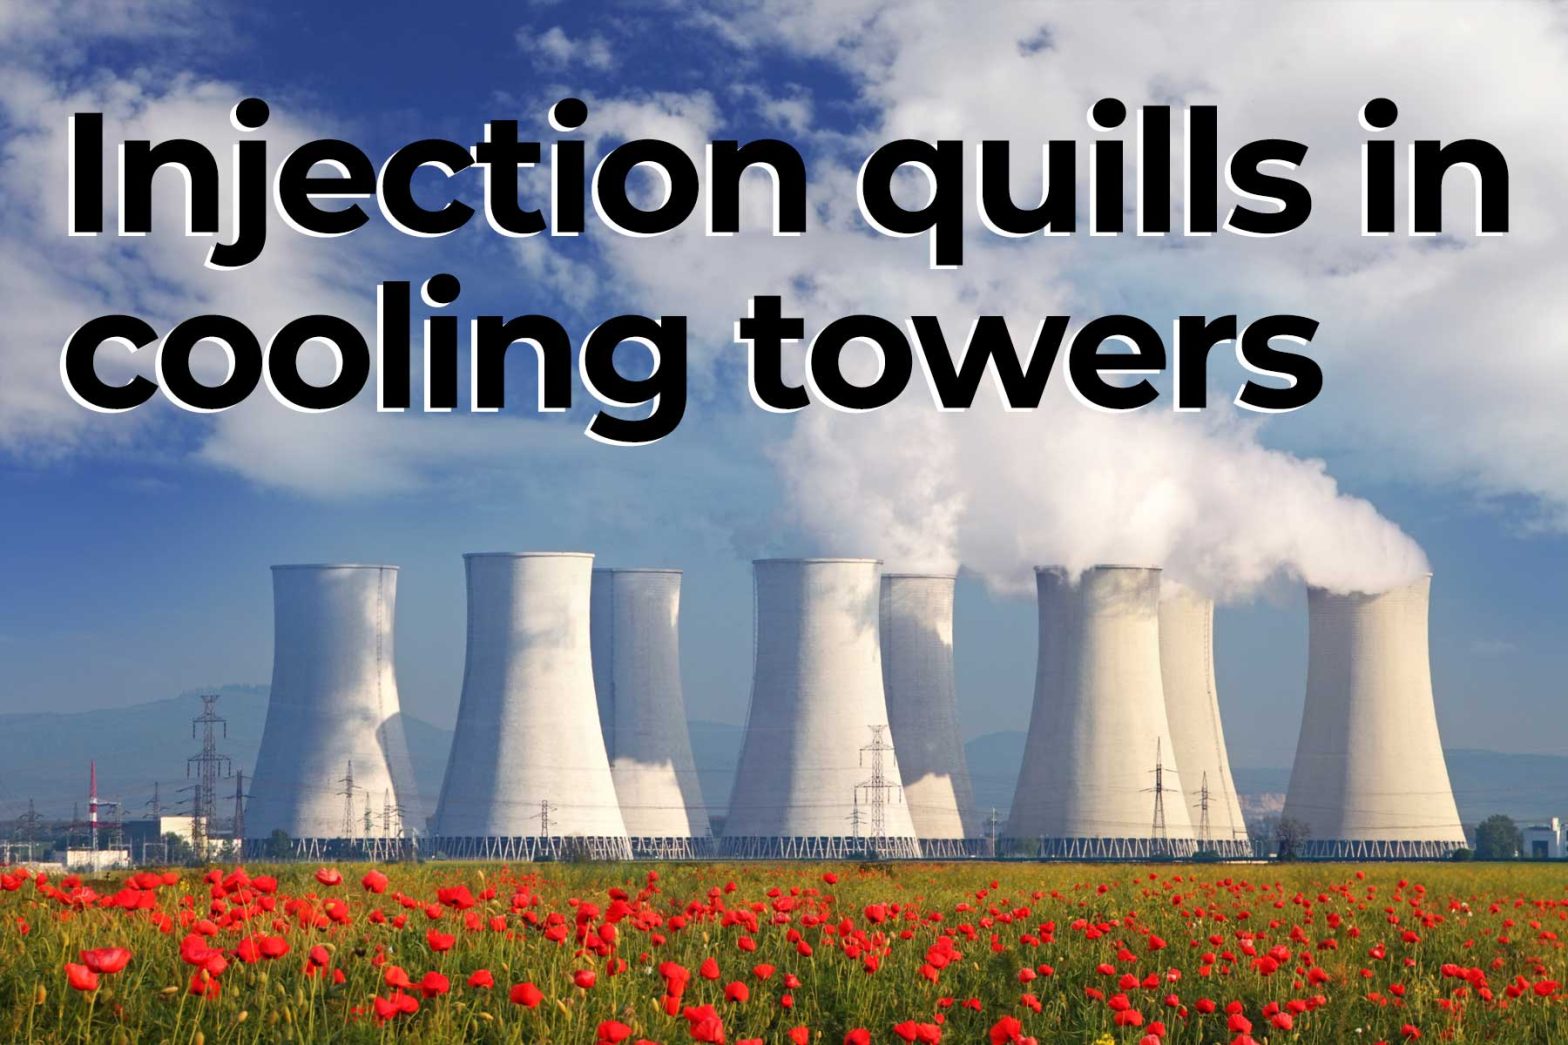 Advancement in injection quill technology for cooling towers